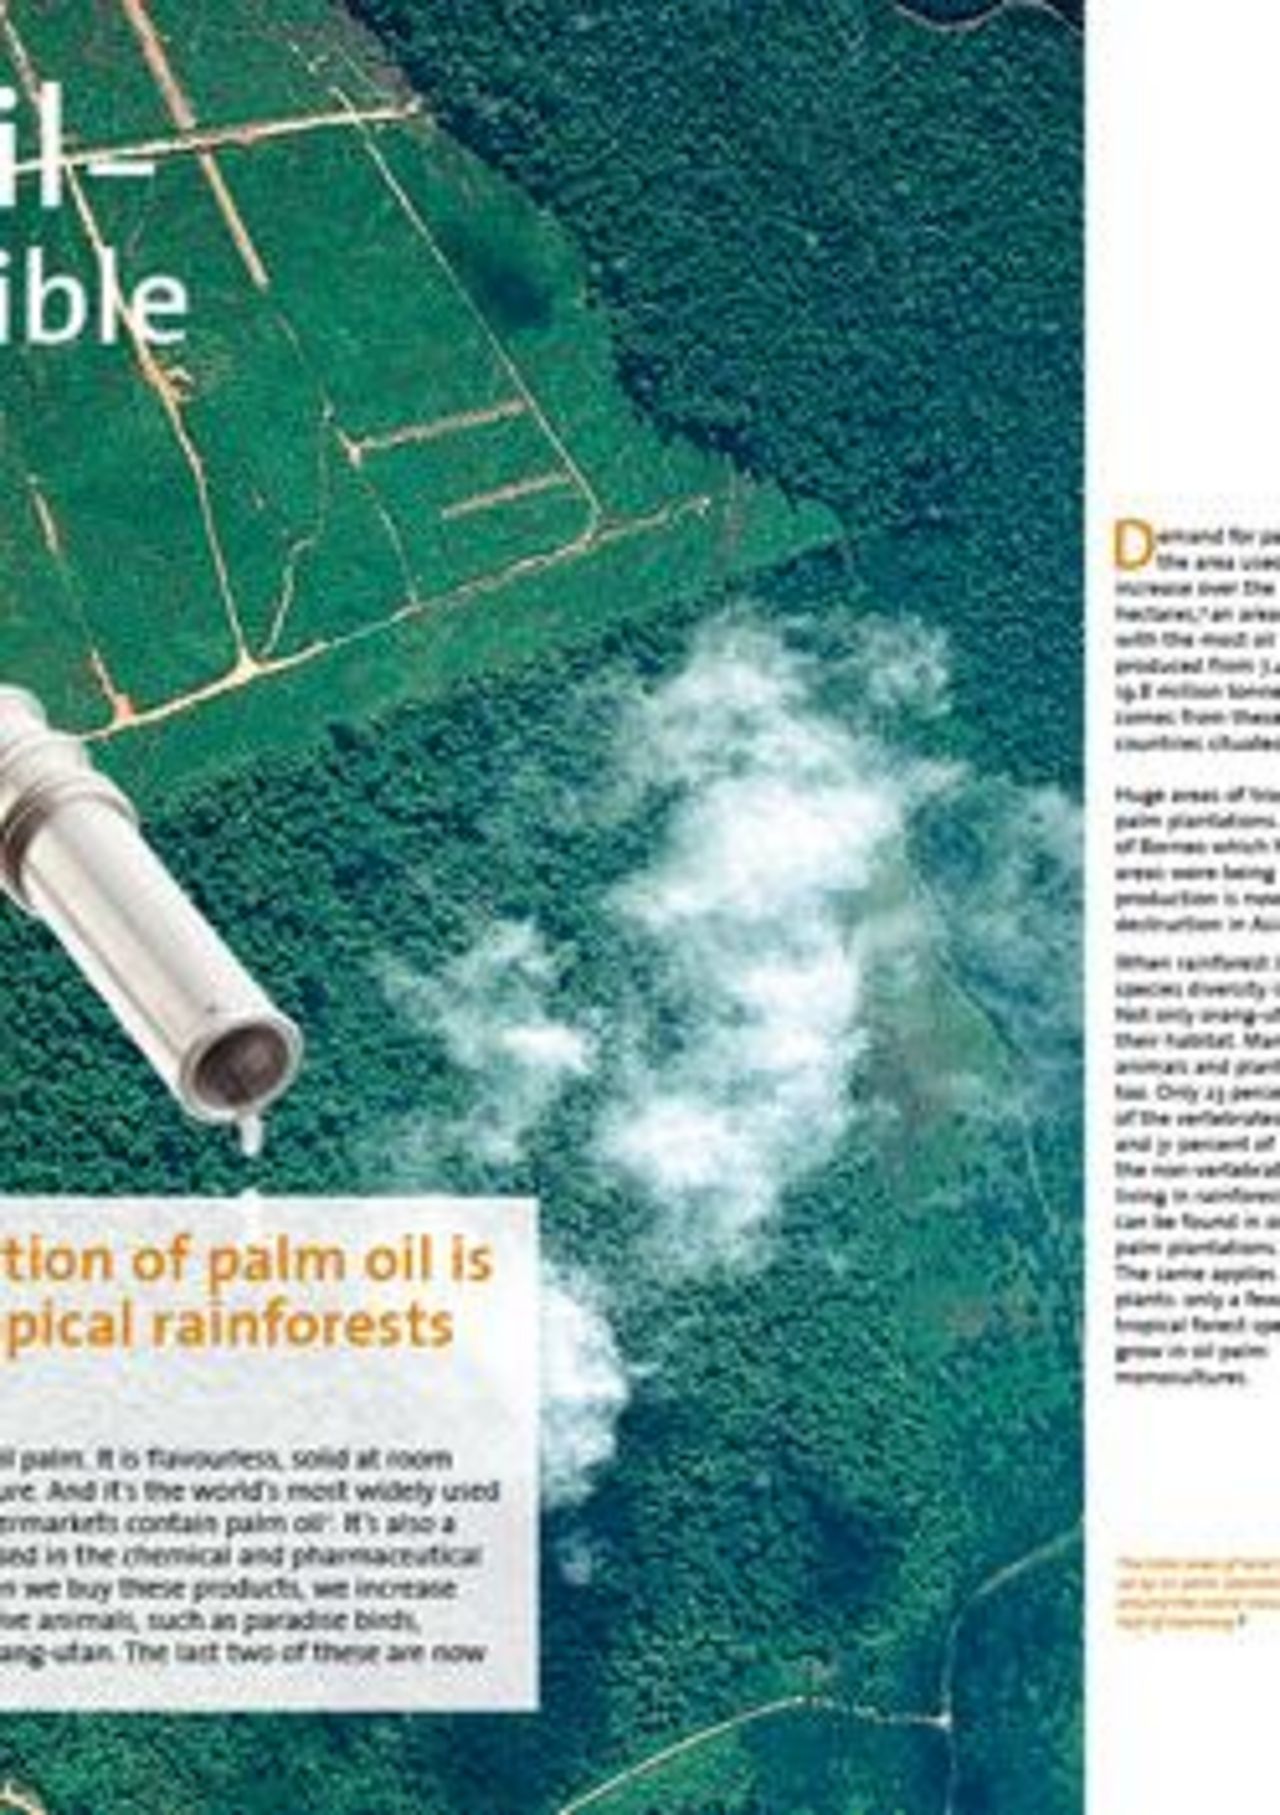 Palmoil - the invisible treat - A factsheet by OroVerde